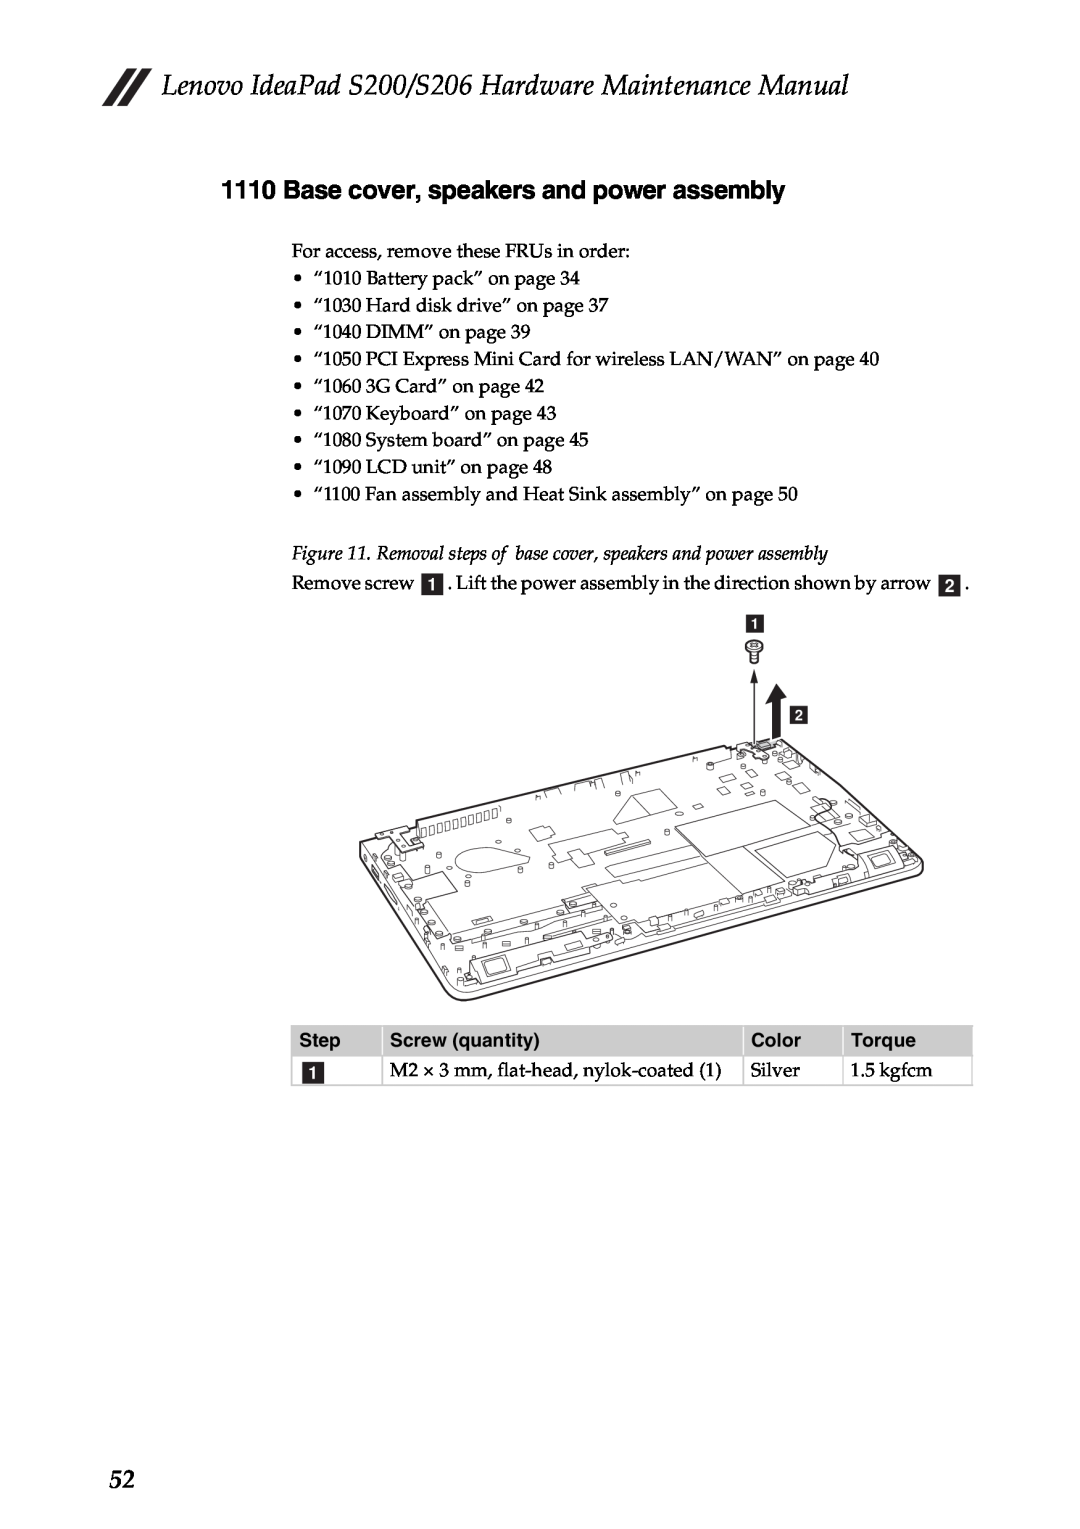 Lenovo S206, S200 manual Base cover, speakers and power assembly 